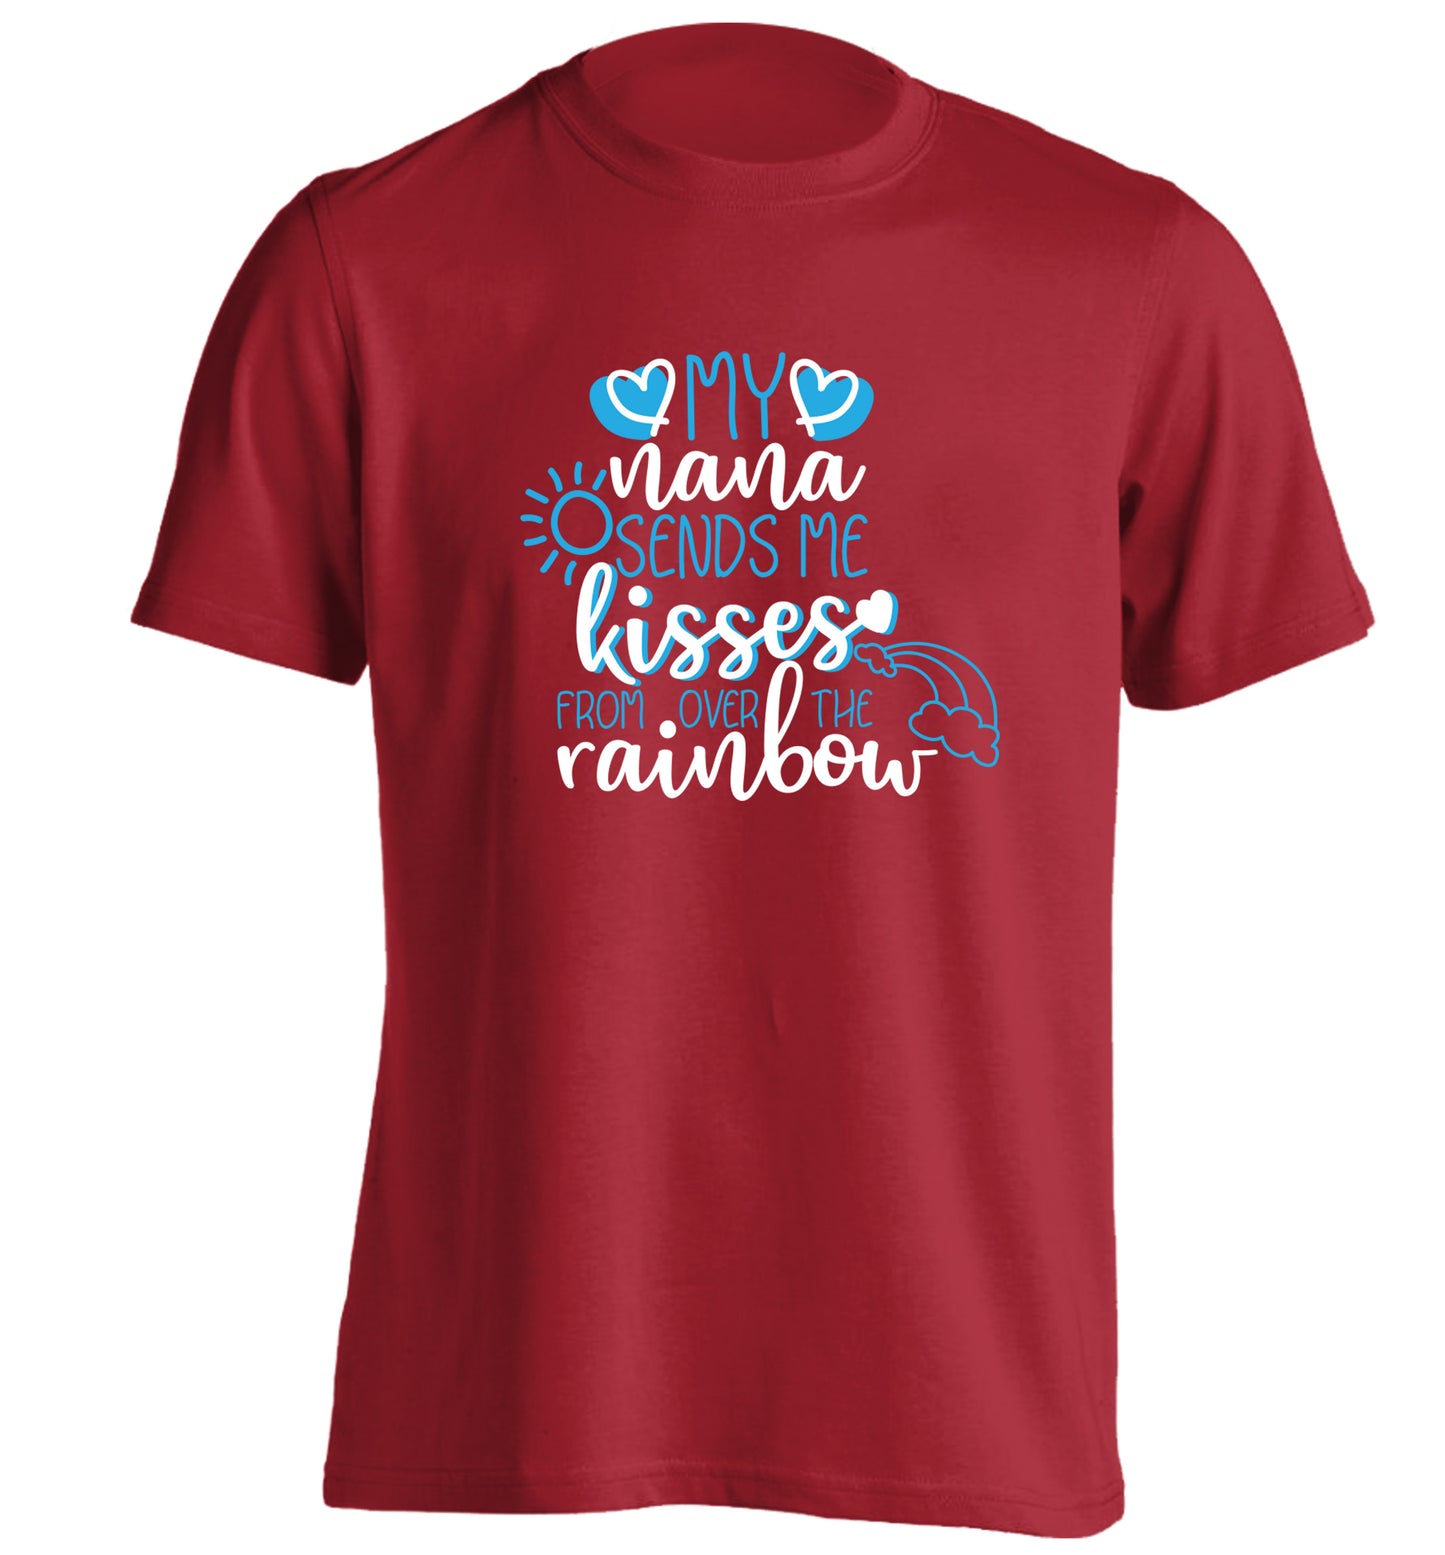 My nana sends me kisses from over the rainbow adults unisex red Tshirt 2XL